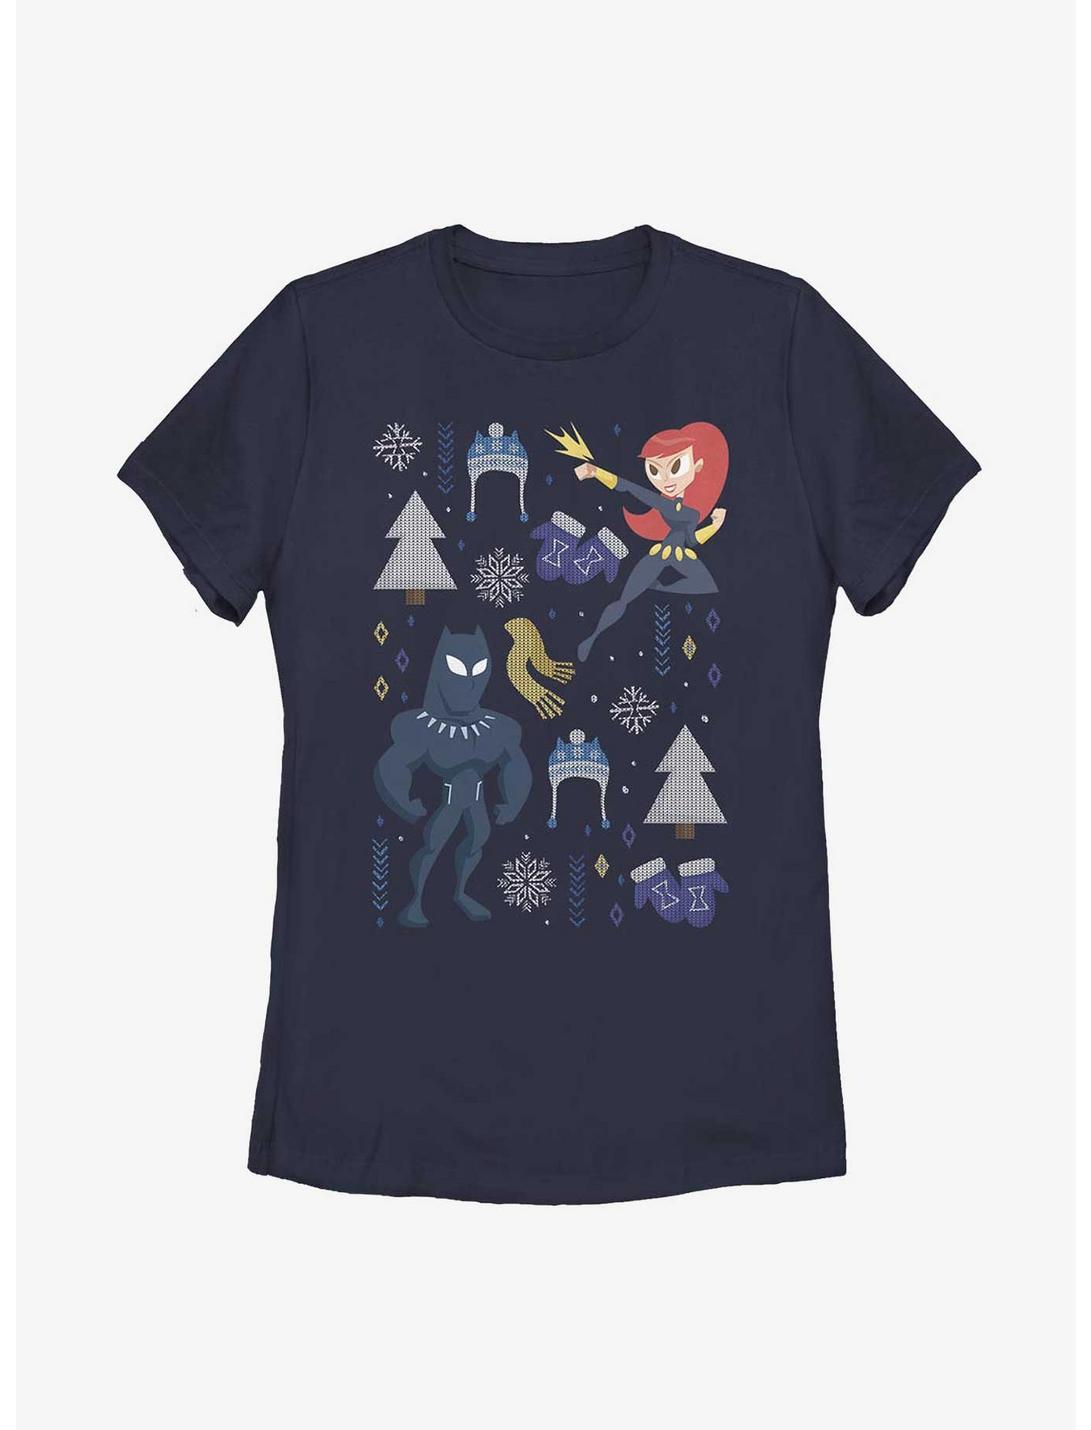 Marvel Black Panther & Black Widow Holiday Womens T-Shirt, NAVY, hi-res